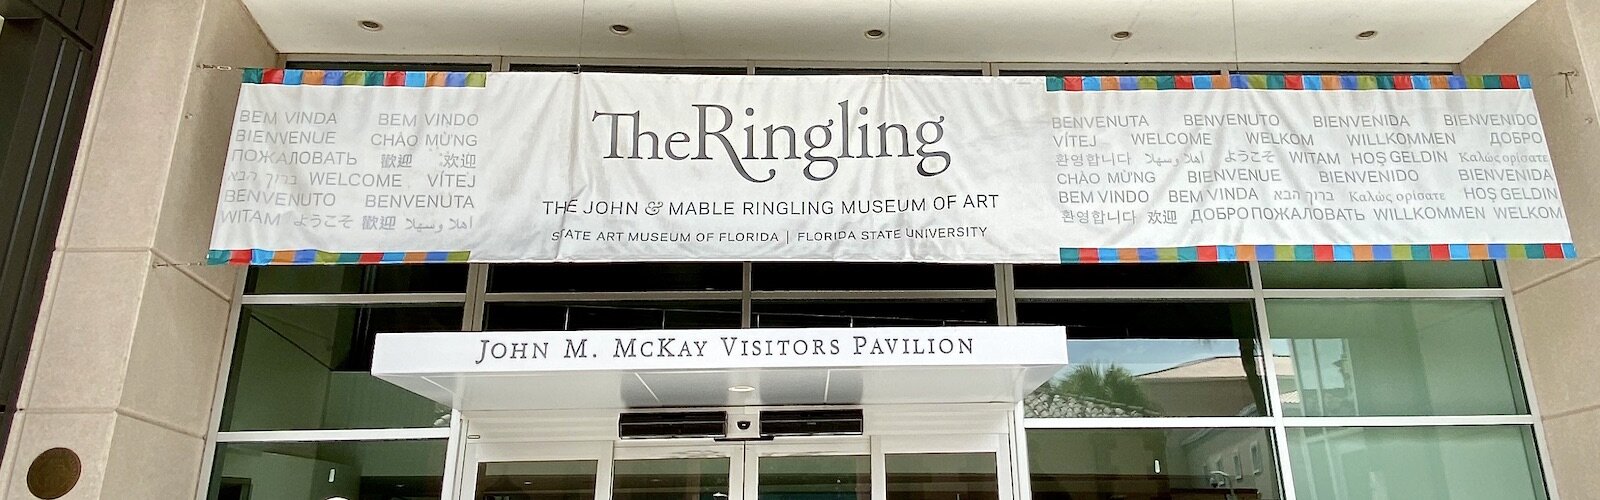 "The Ringling serves as the legacy of John and Mable Ringling -- a place of art, architecture, and circus in an environment that inspires, educates, and entertains.''